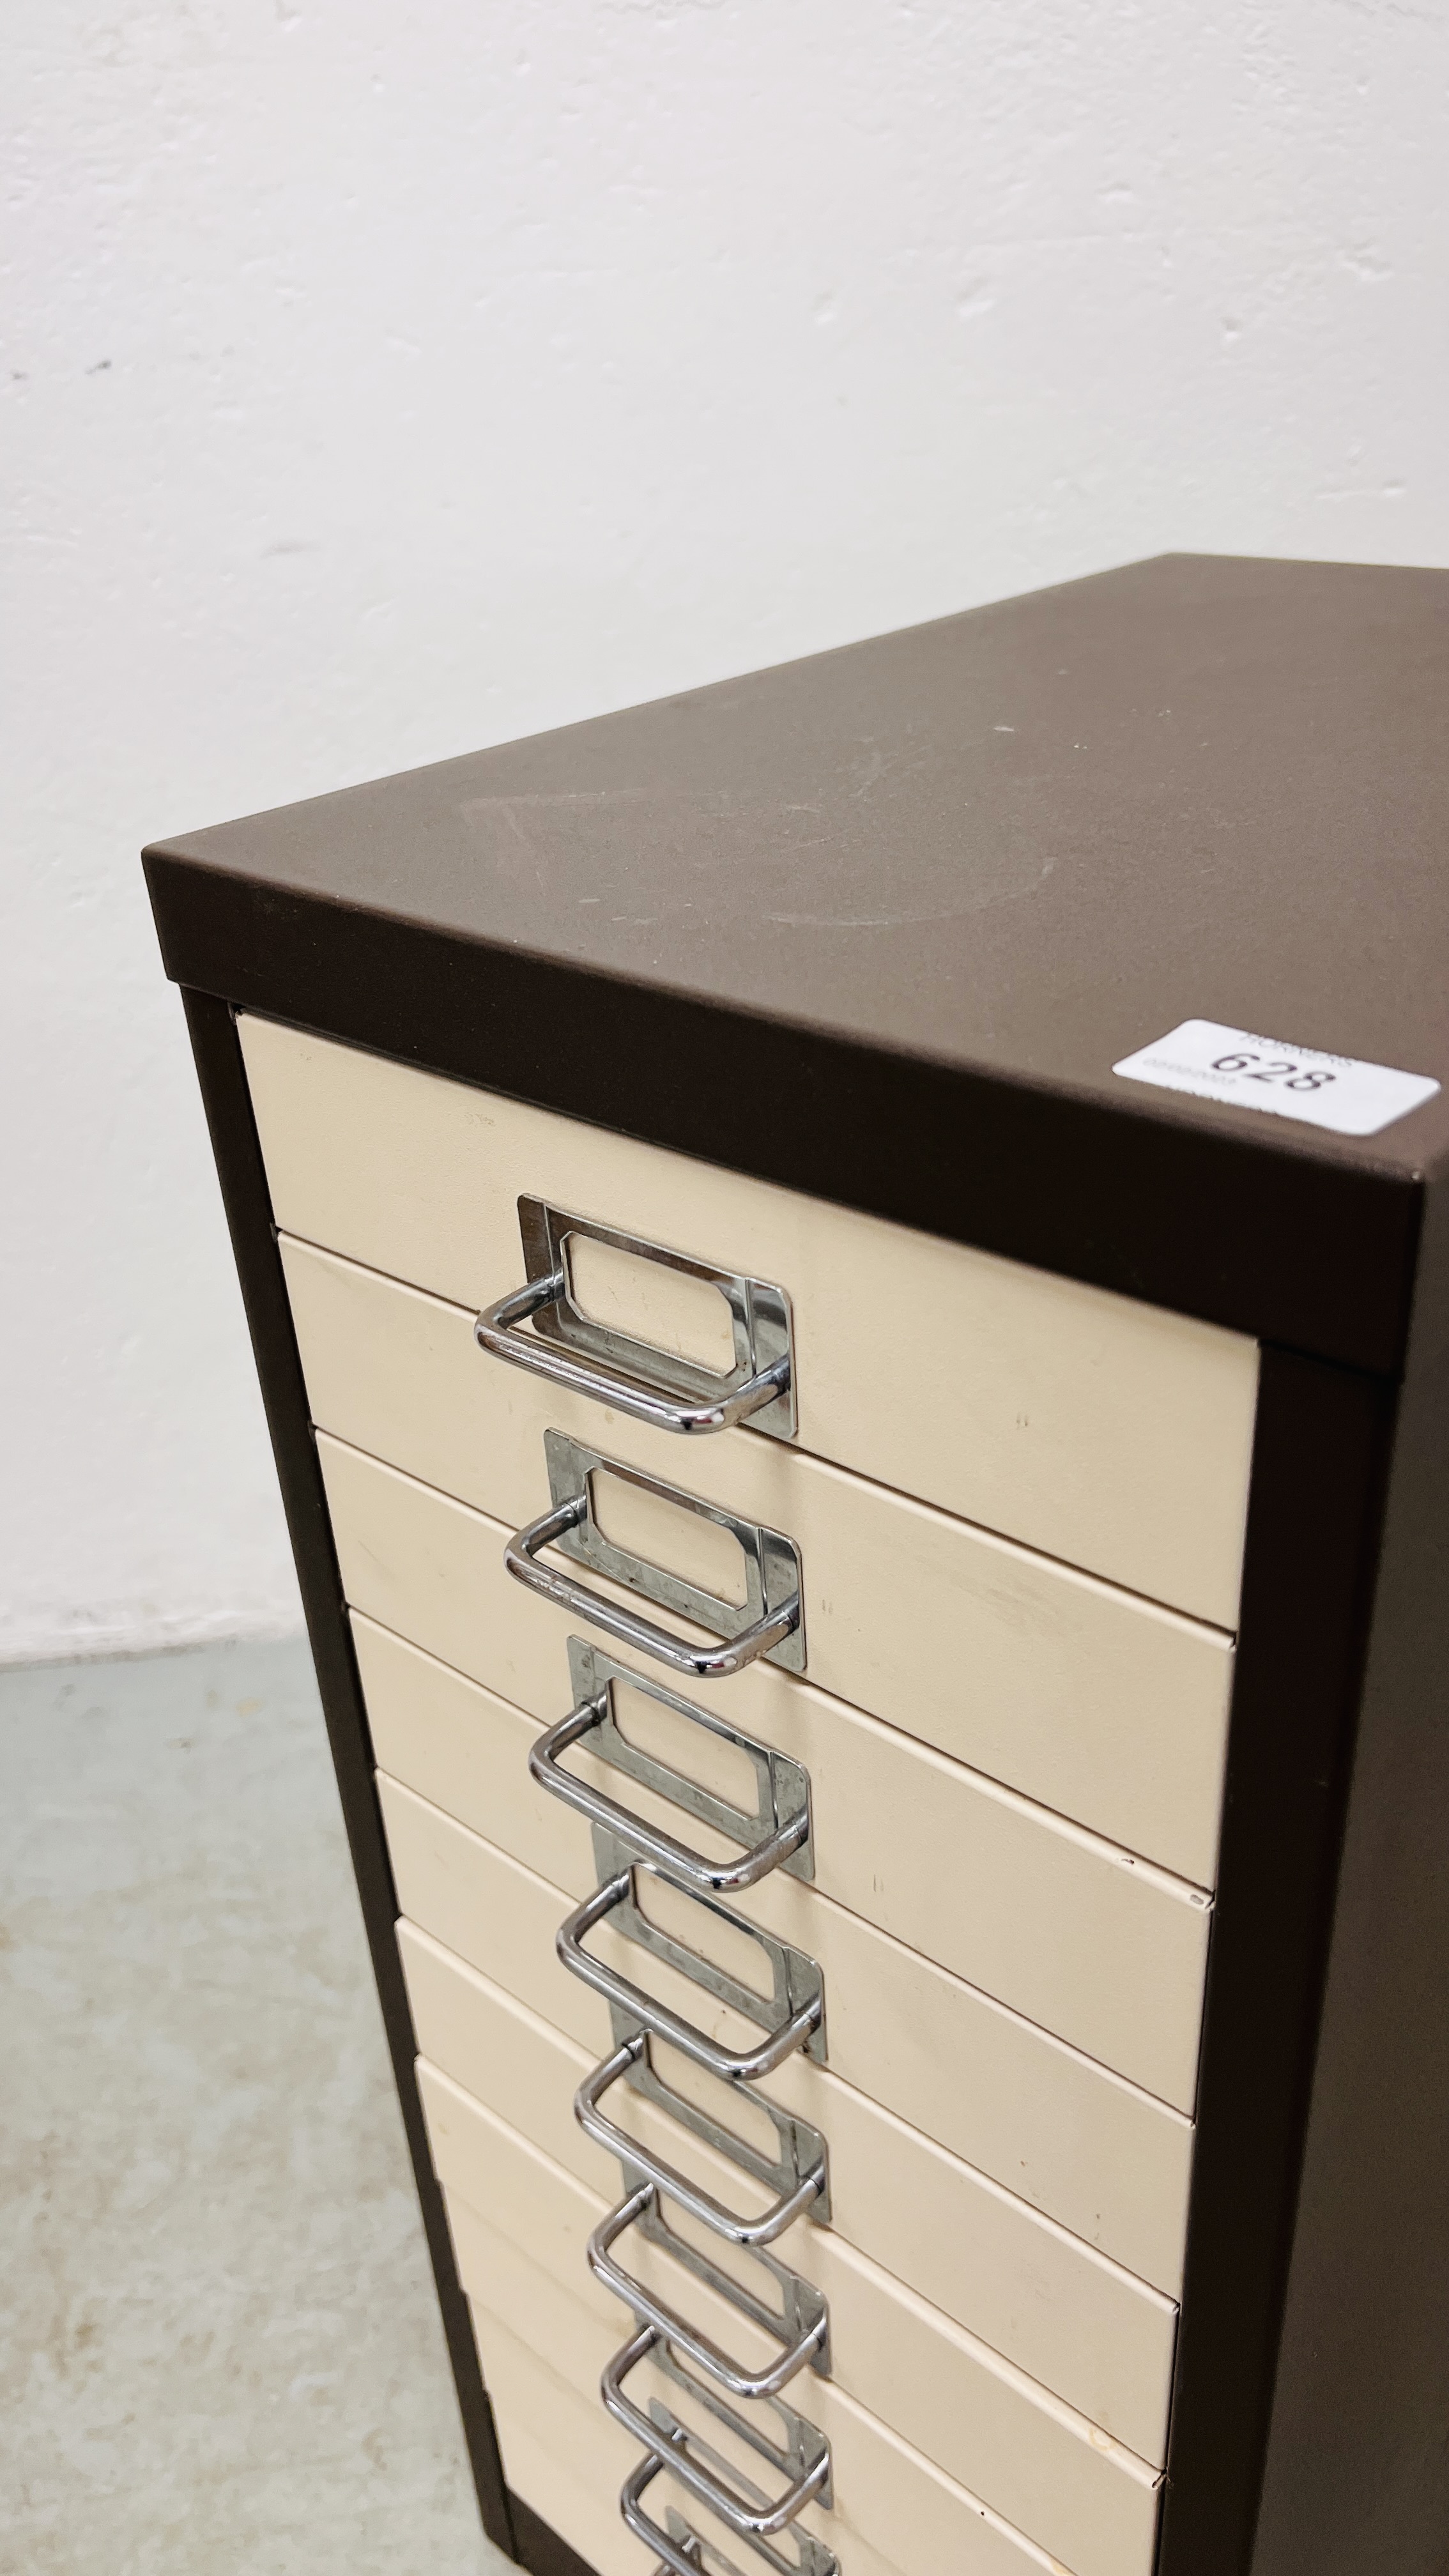 A SMALL STEEL TEN DRAWER FILING CHEST - W 28CM. D 41CM. H 61CM. - Image 2 of 5